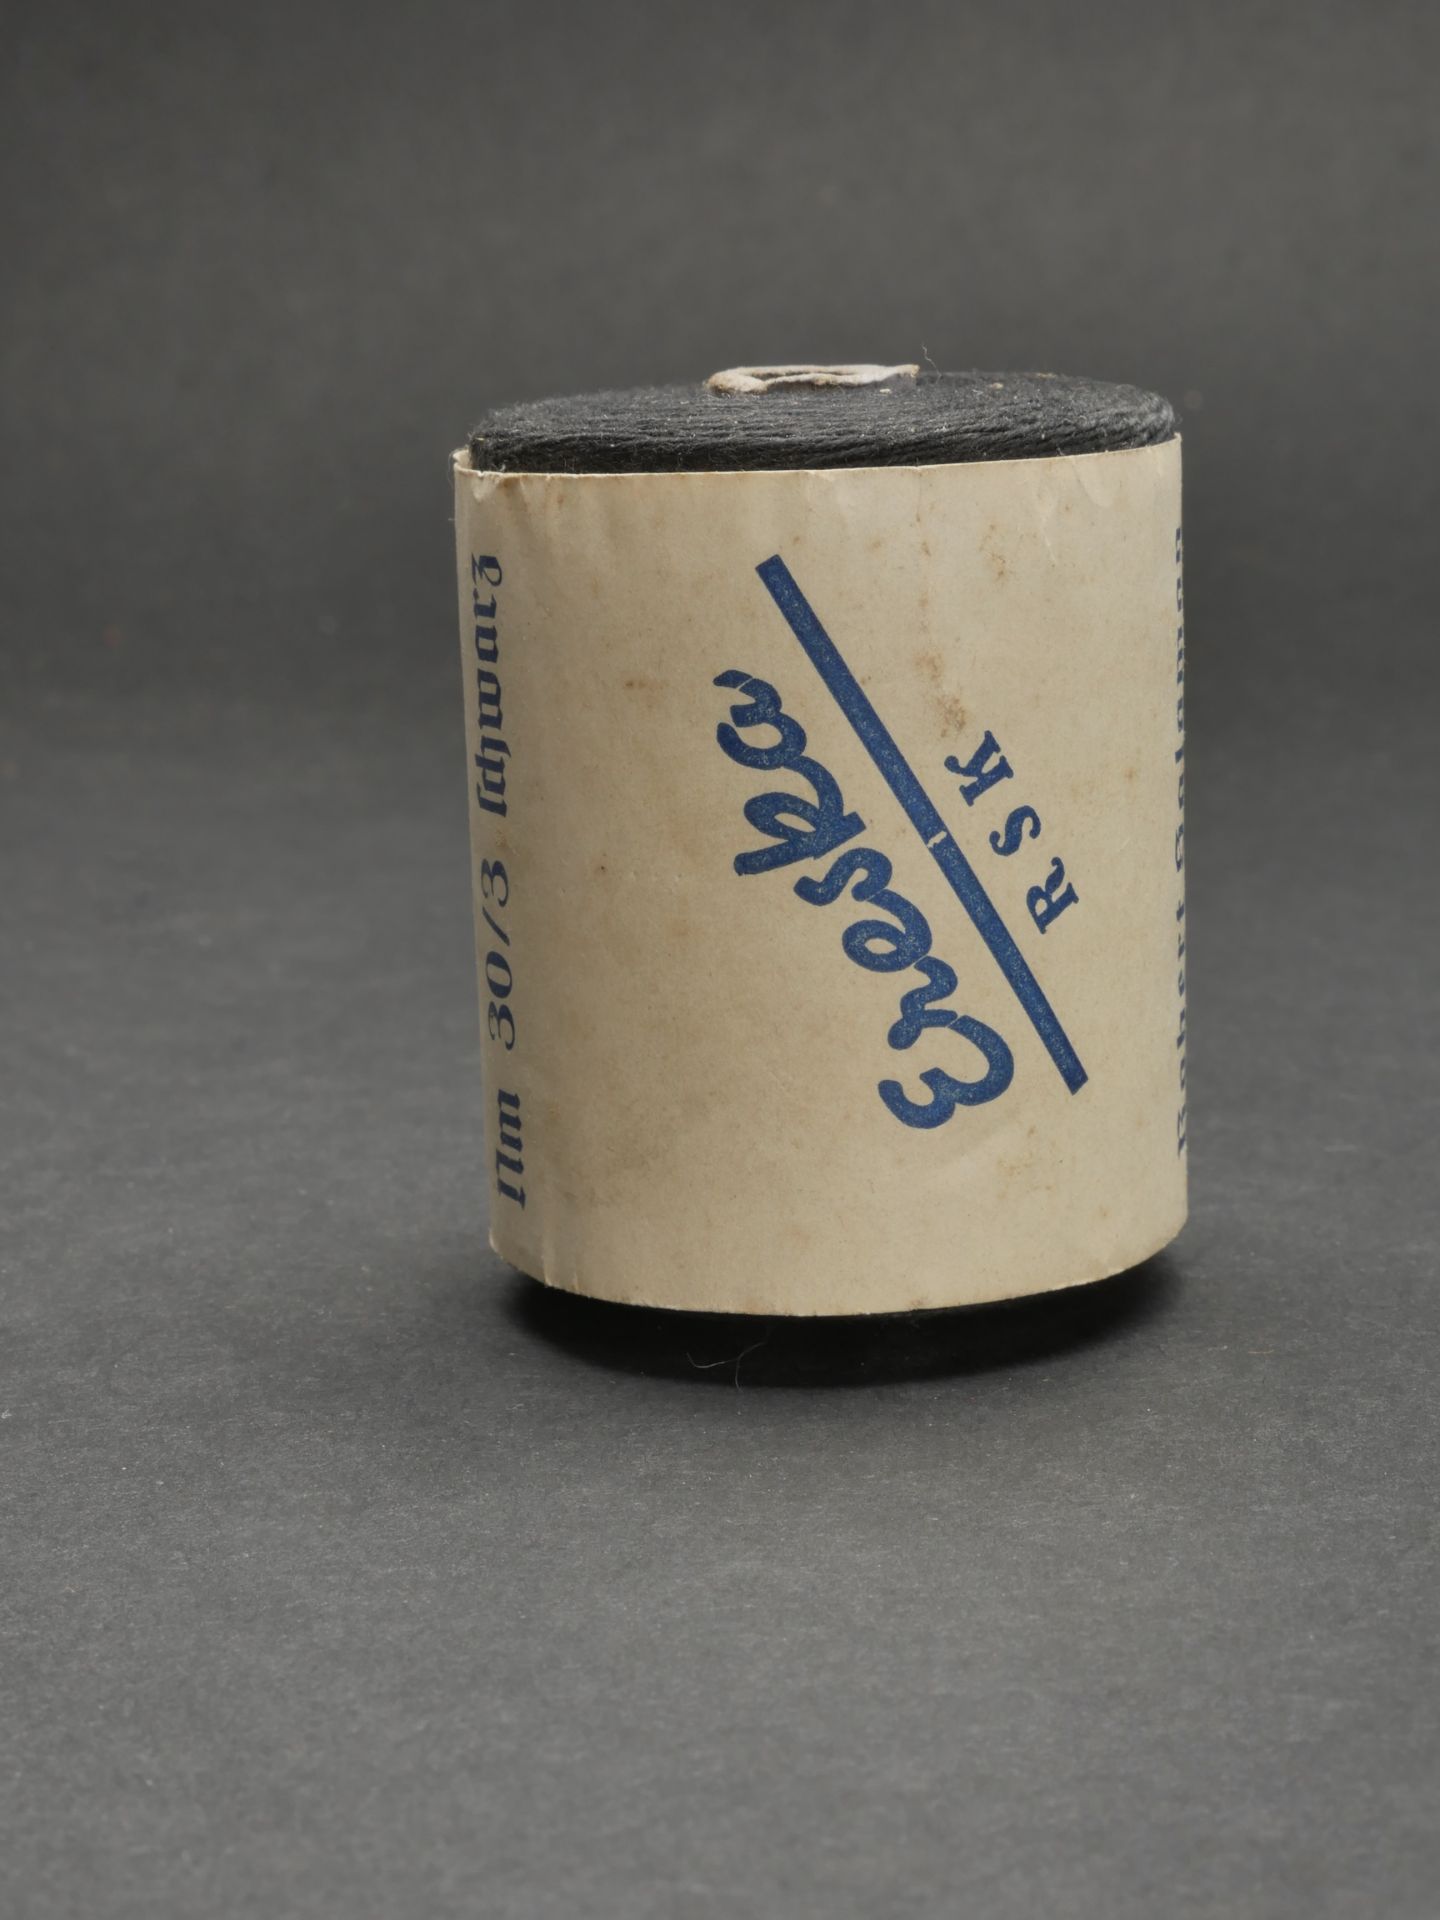 Bobine de fils  a coudre. Spool of sewing threads. - Image 4 of 5